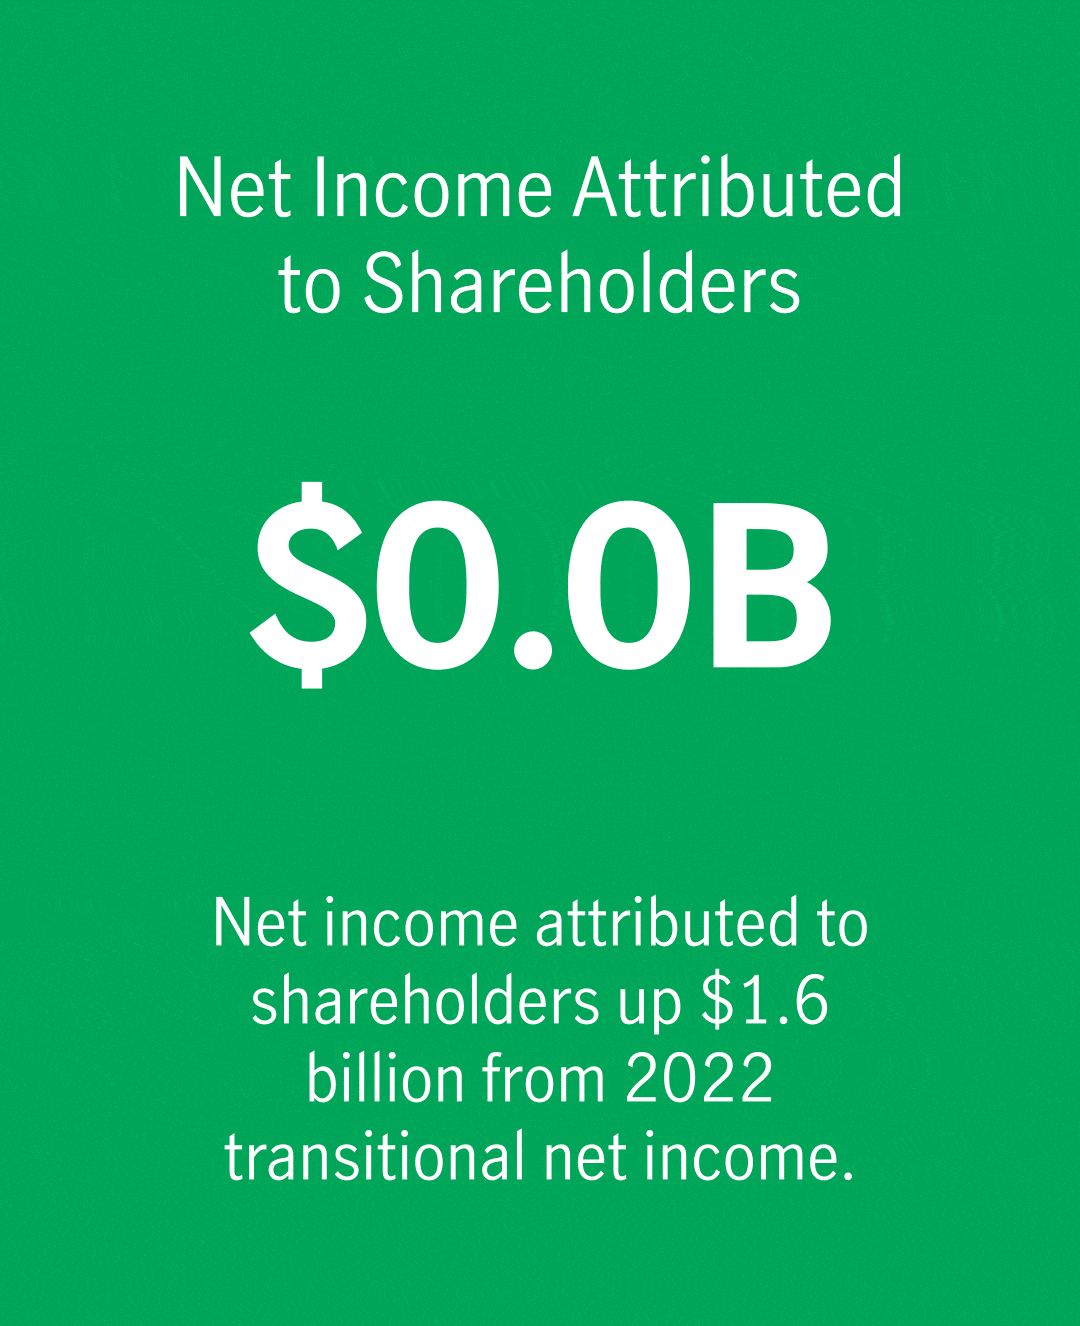 $5.1B in net income attributed to shareholders